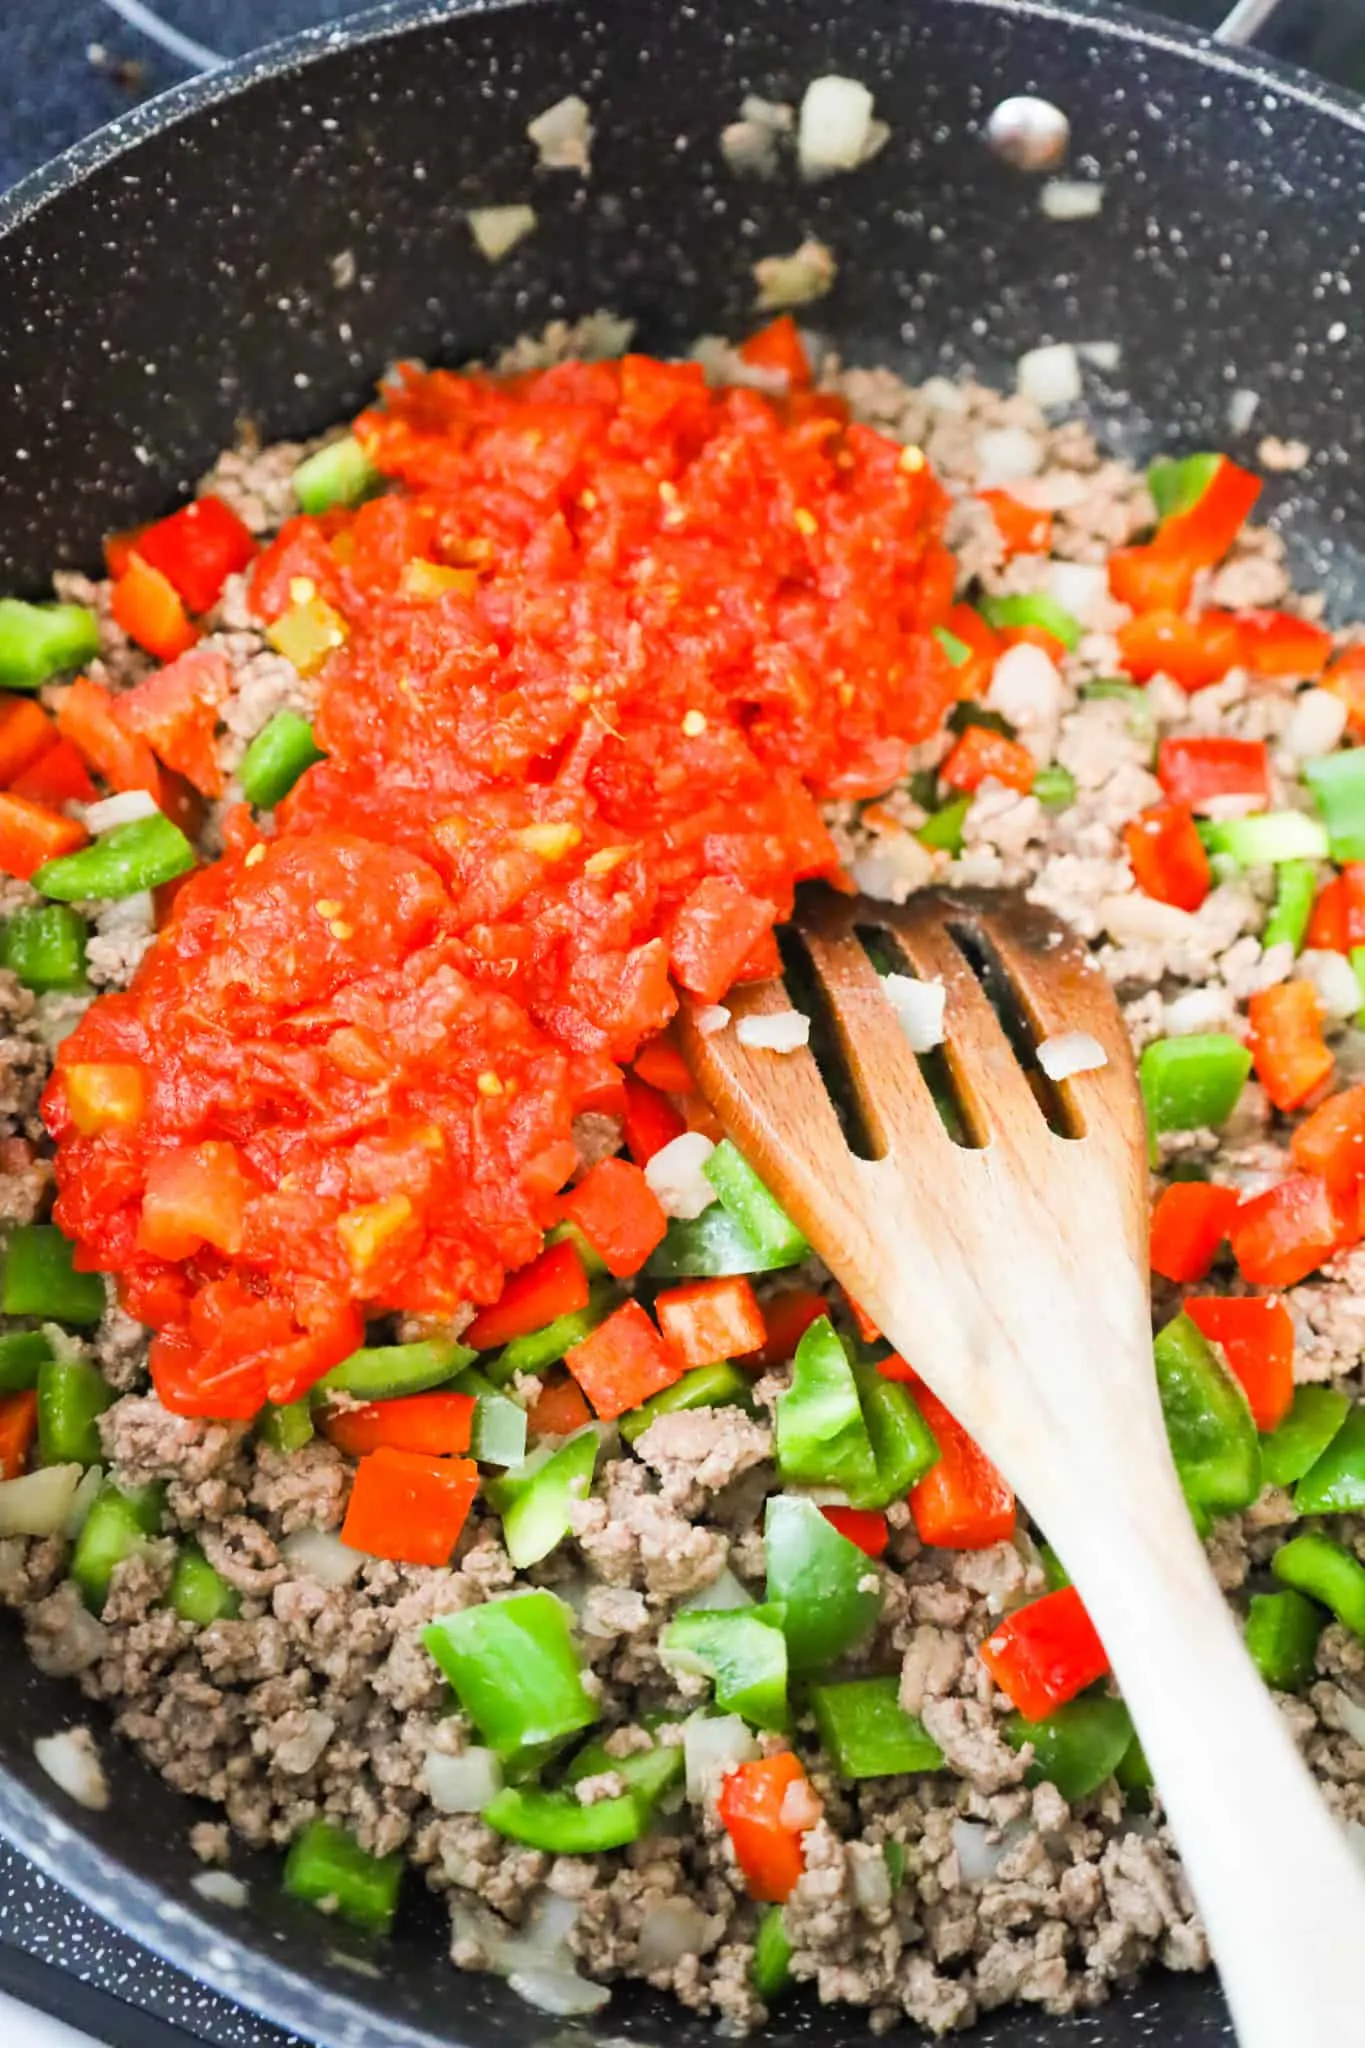 Rotel diced tomatoes on top of cooked ground beef and diced peppers mixture